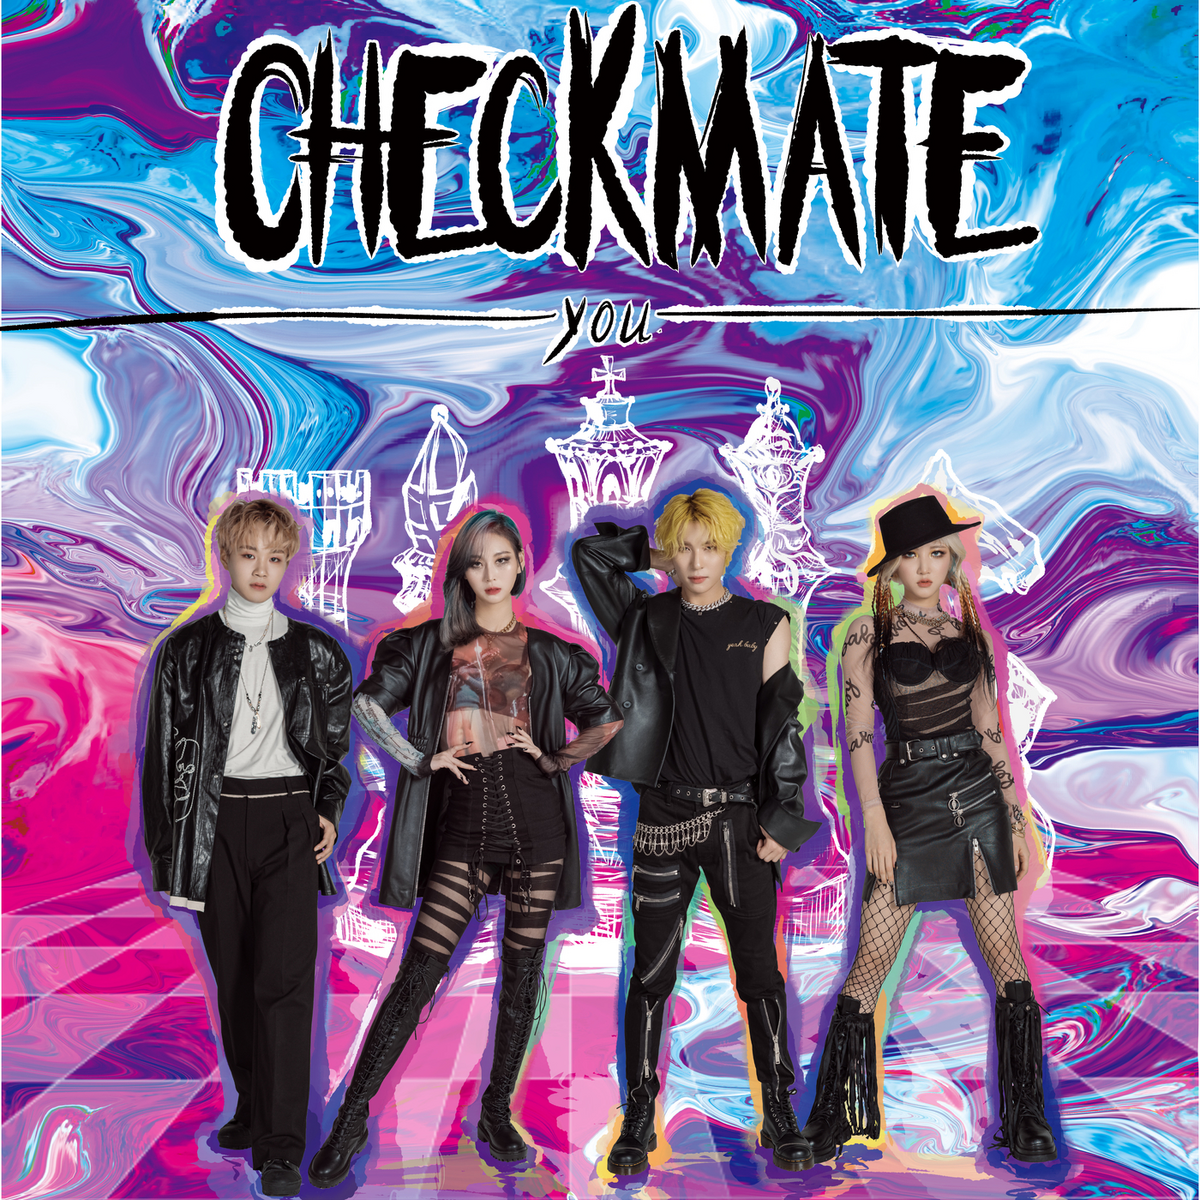 Checkmate Pt.2-doublecheck- - song and lyrics by SUIKEN, GOCCI